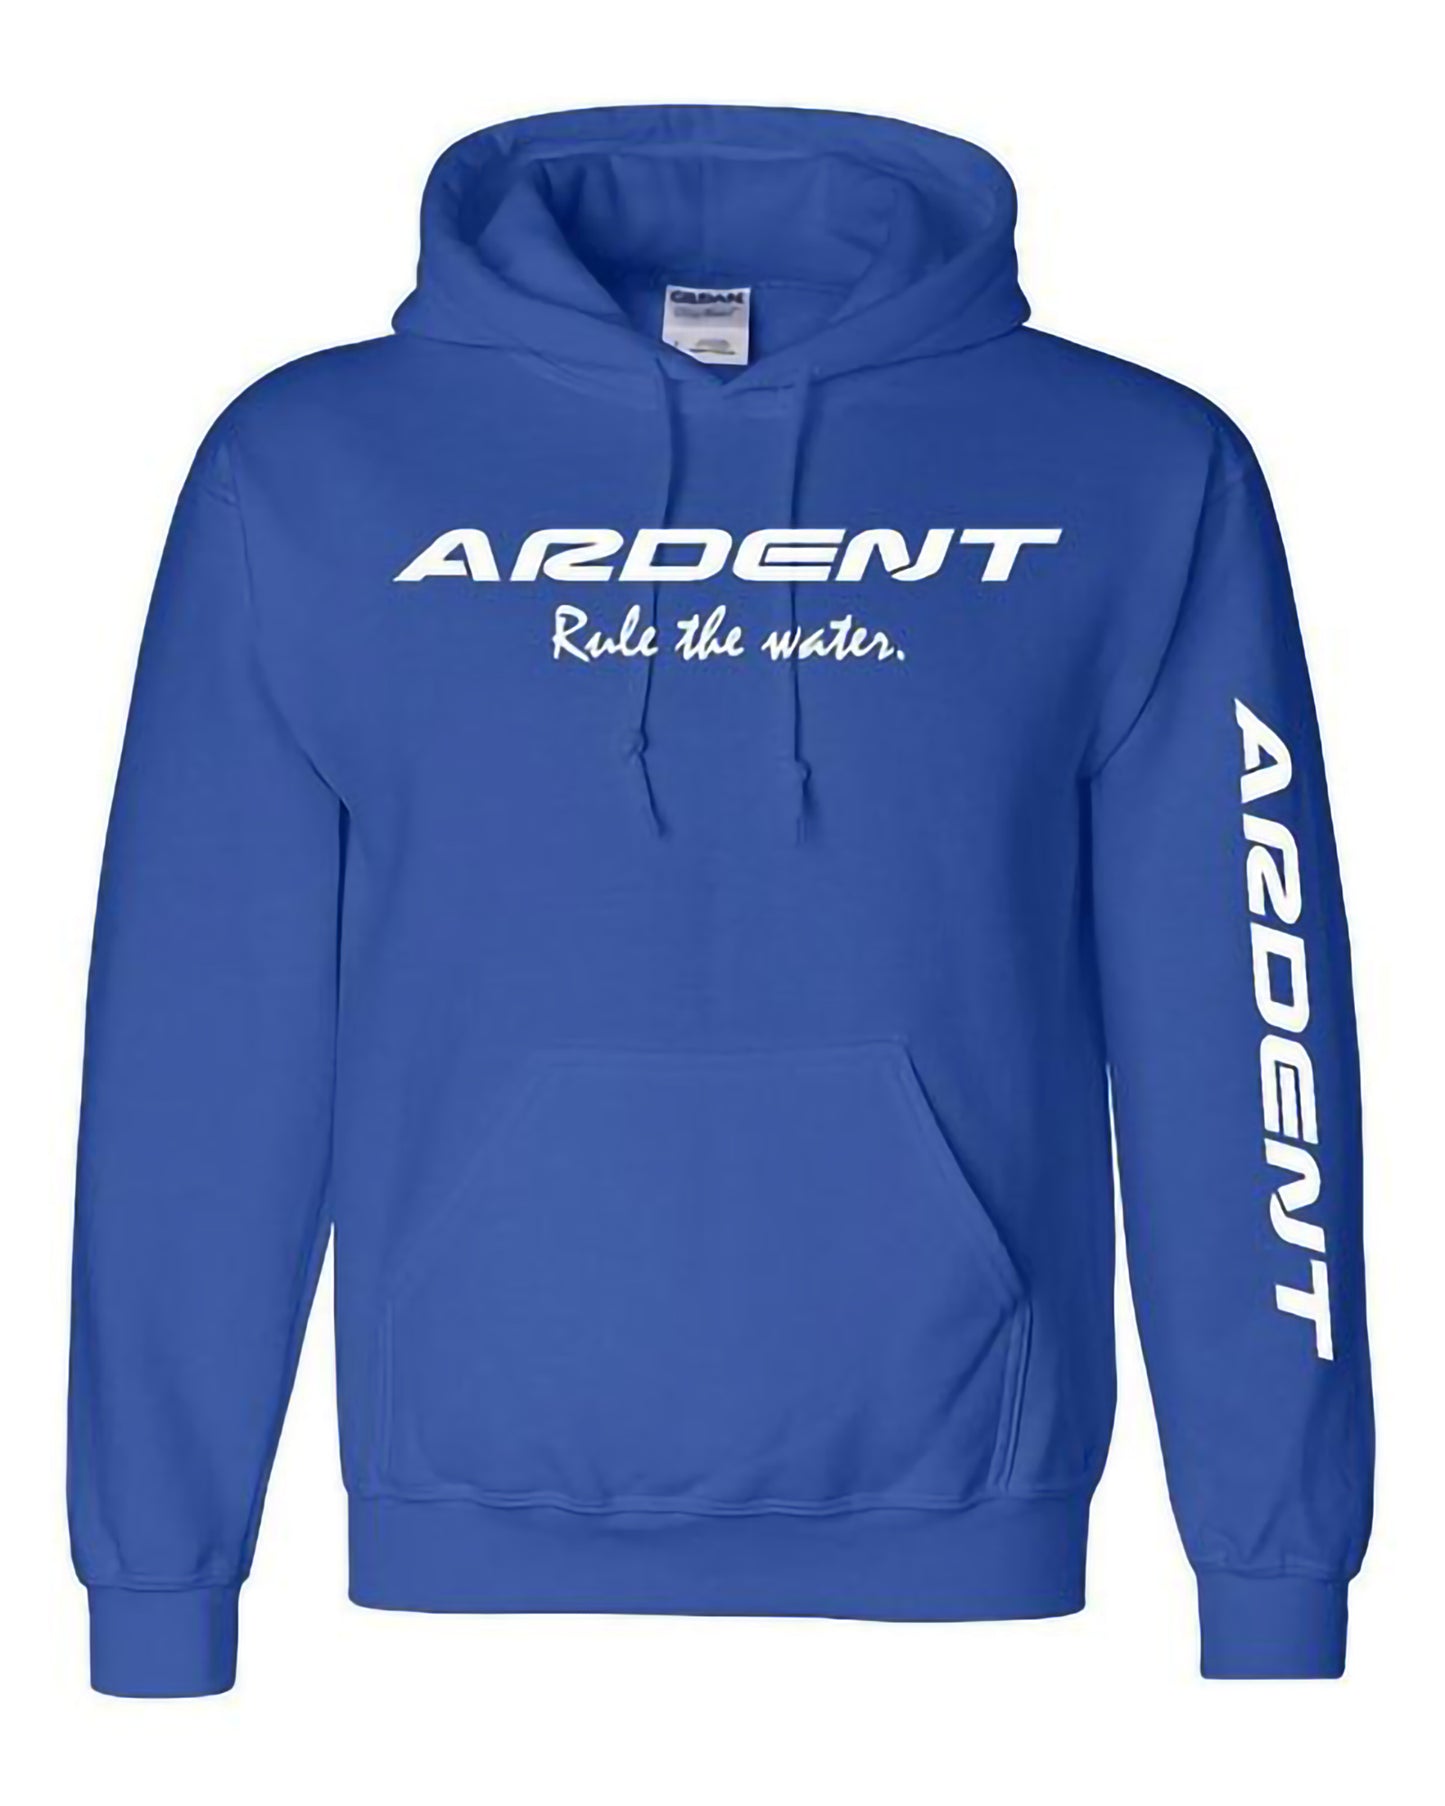 Front of a blue hoodie with white text, text on the hoodie: ARDENT Rule the water. ARDENT